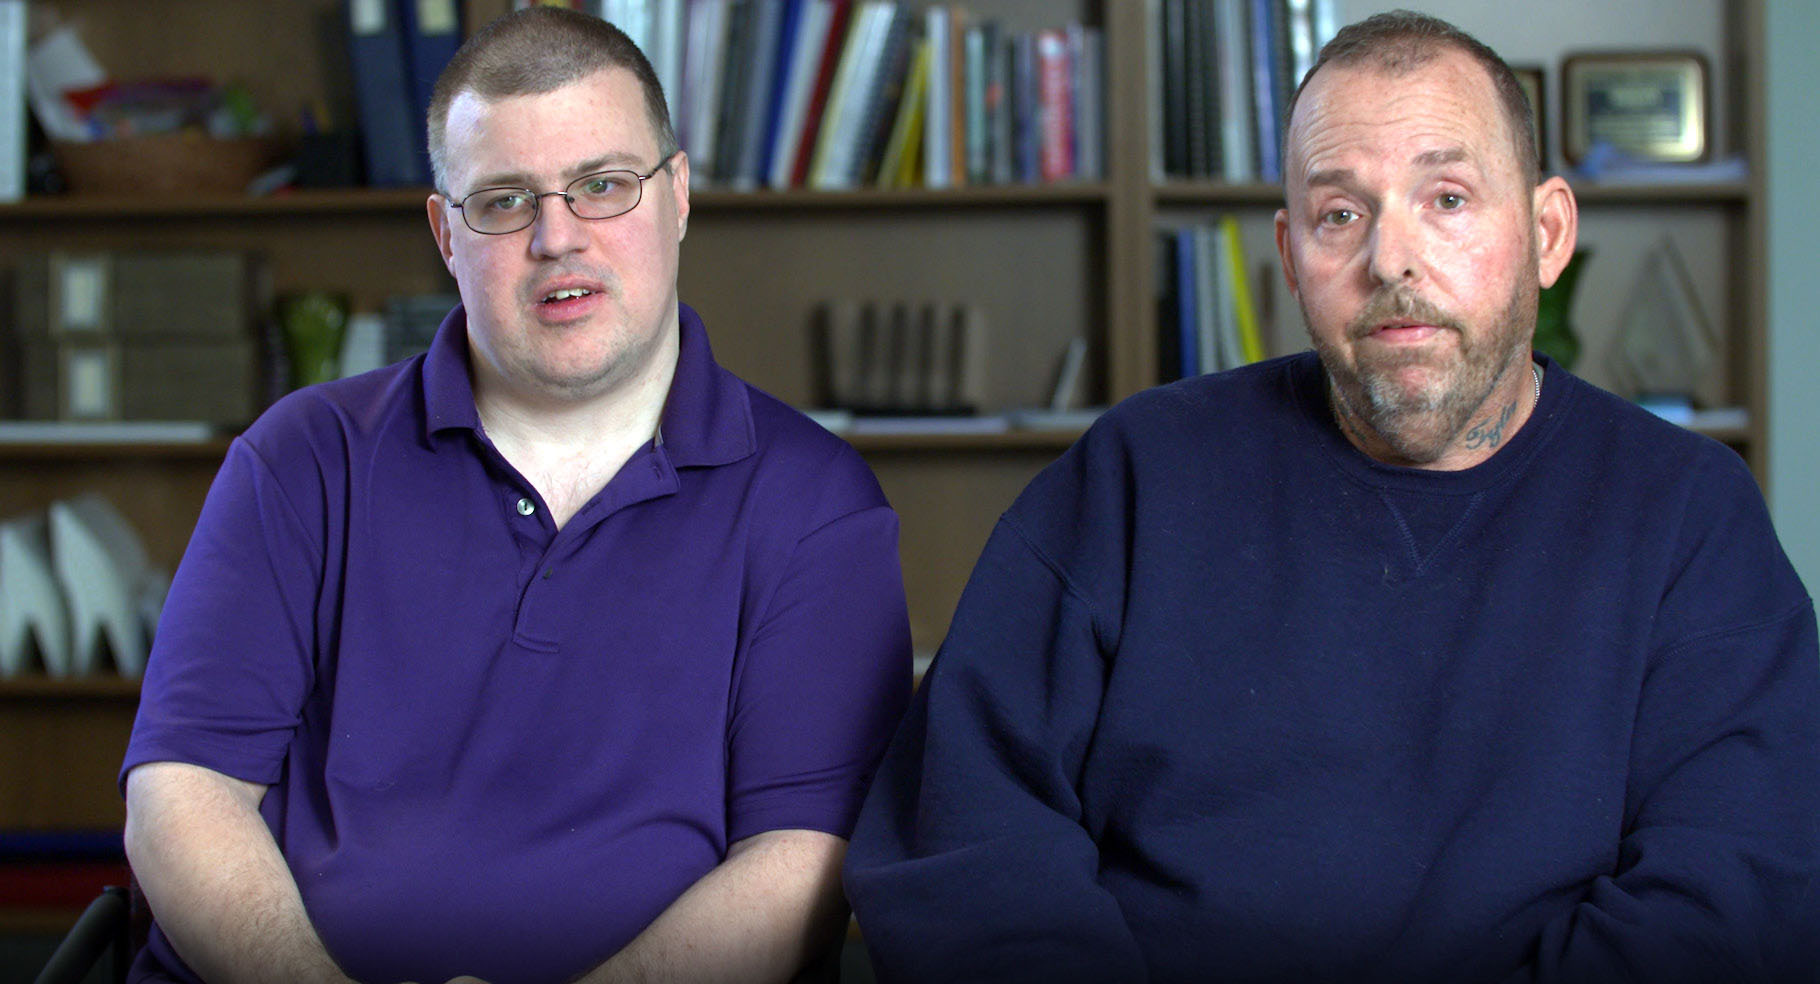 This photo is at the top of the opening page for the article We’re Talking About Lives Here: The Personal Impact of the Direct Support Workforce Crisis.  The photo shows Shawn Fultz seated on the left next to Jim Friss on the right, with a set of bookshelves in the background. They’re facing the camera and have serious looks on their faces. 